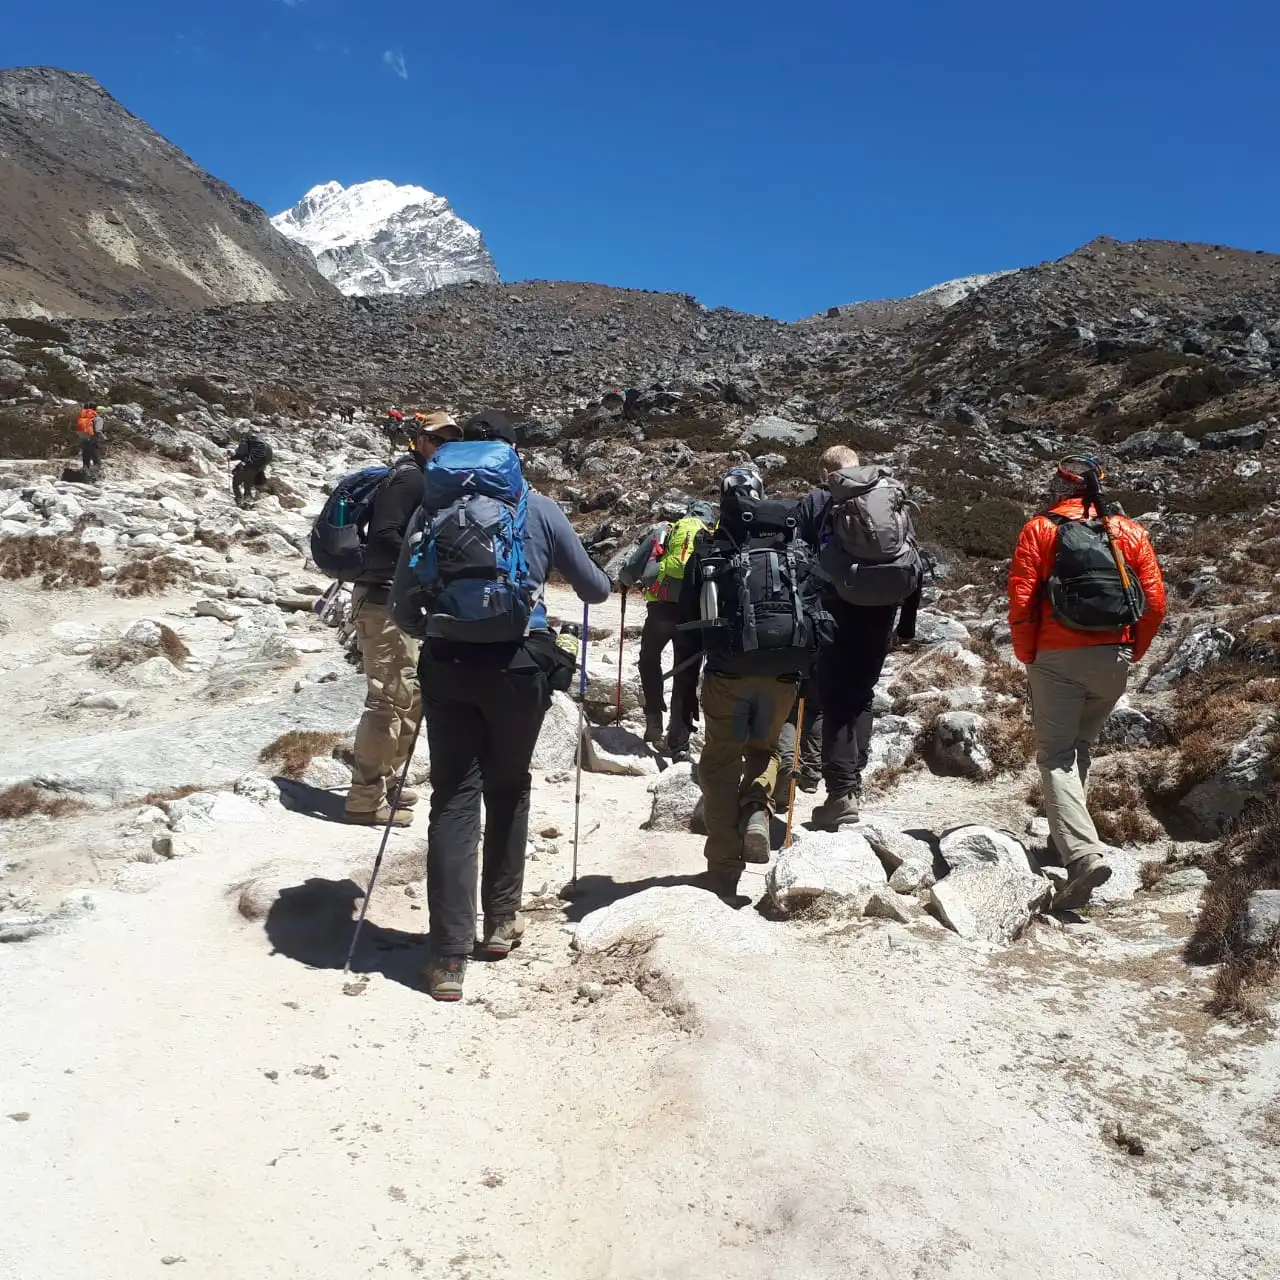 How to reach Everest Base Camp by walk, jeep, bus, train?